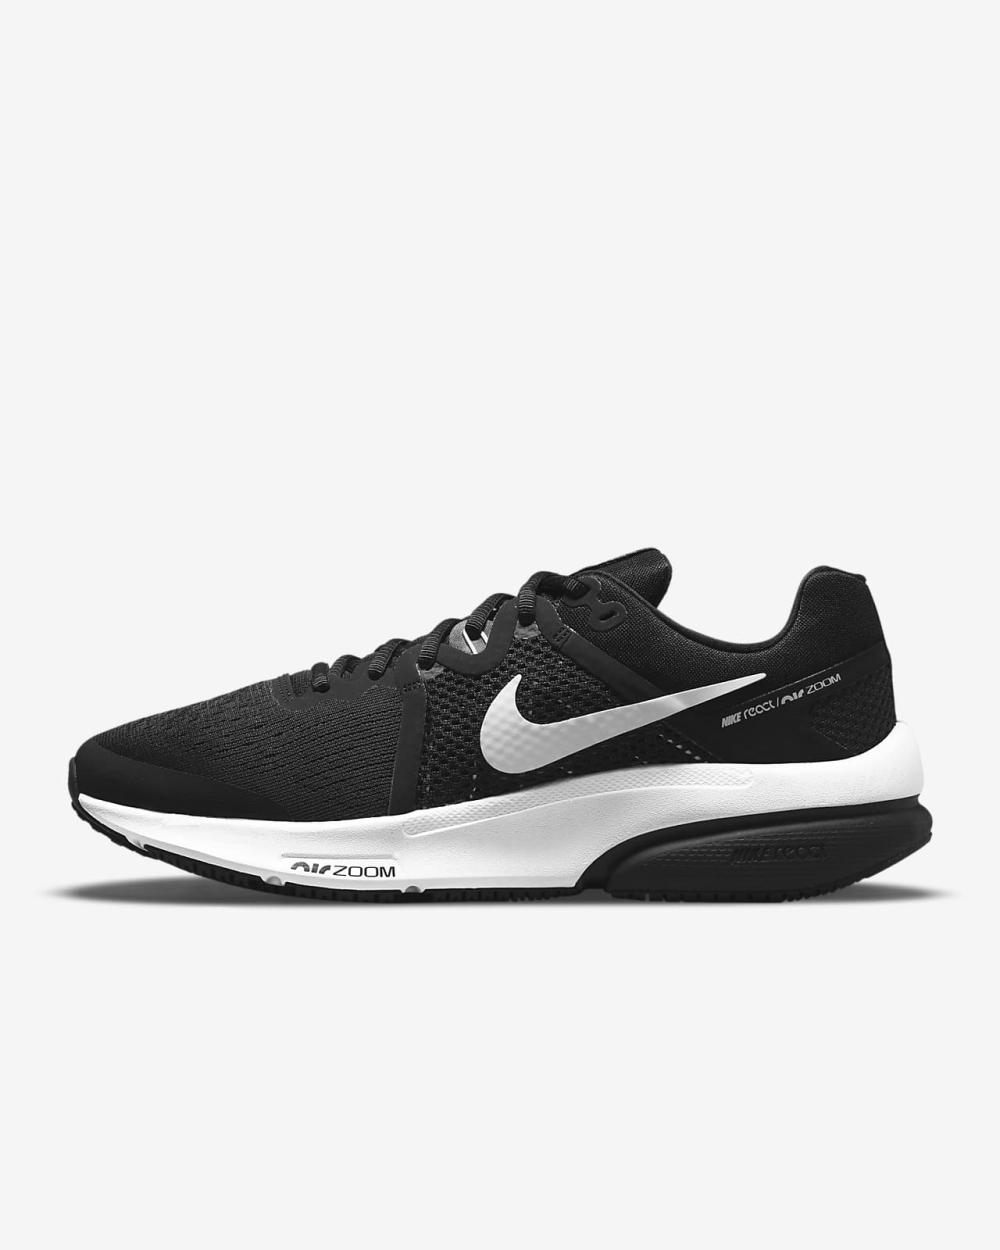 Giày Nike Zoom Prevail - DA1102 001 | King Shoes